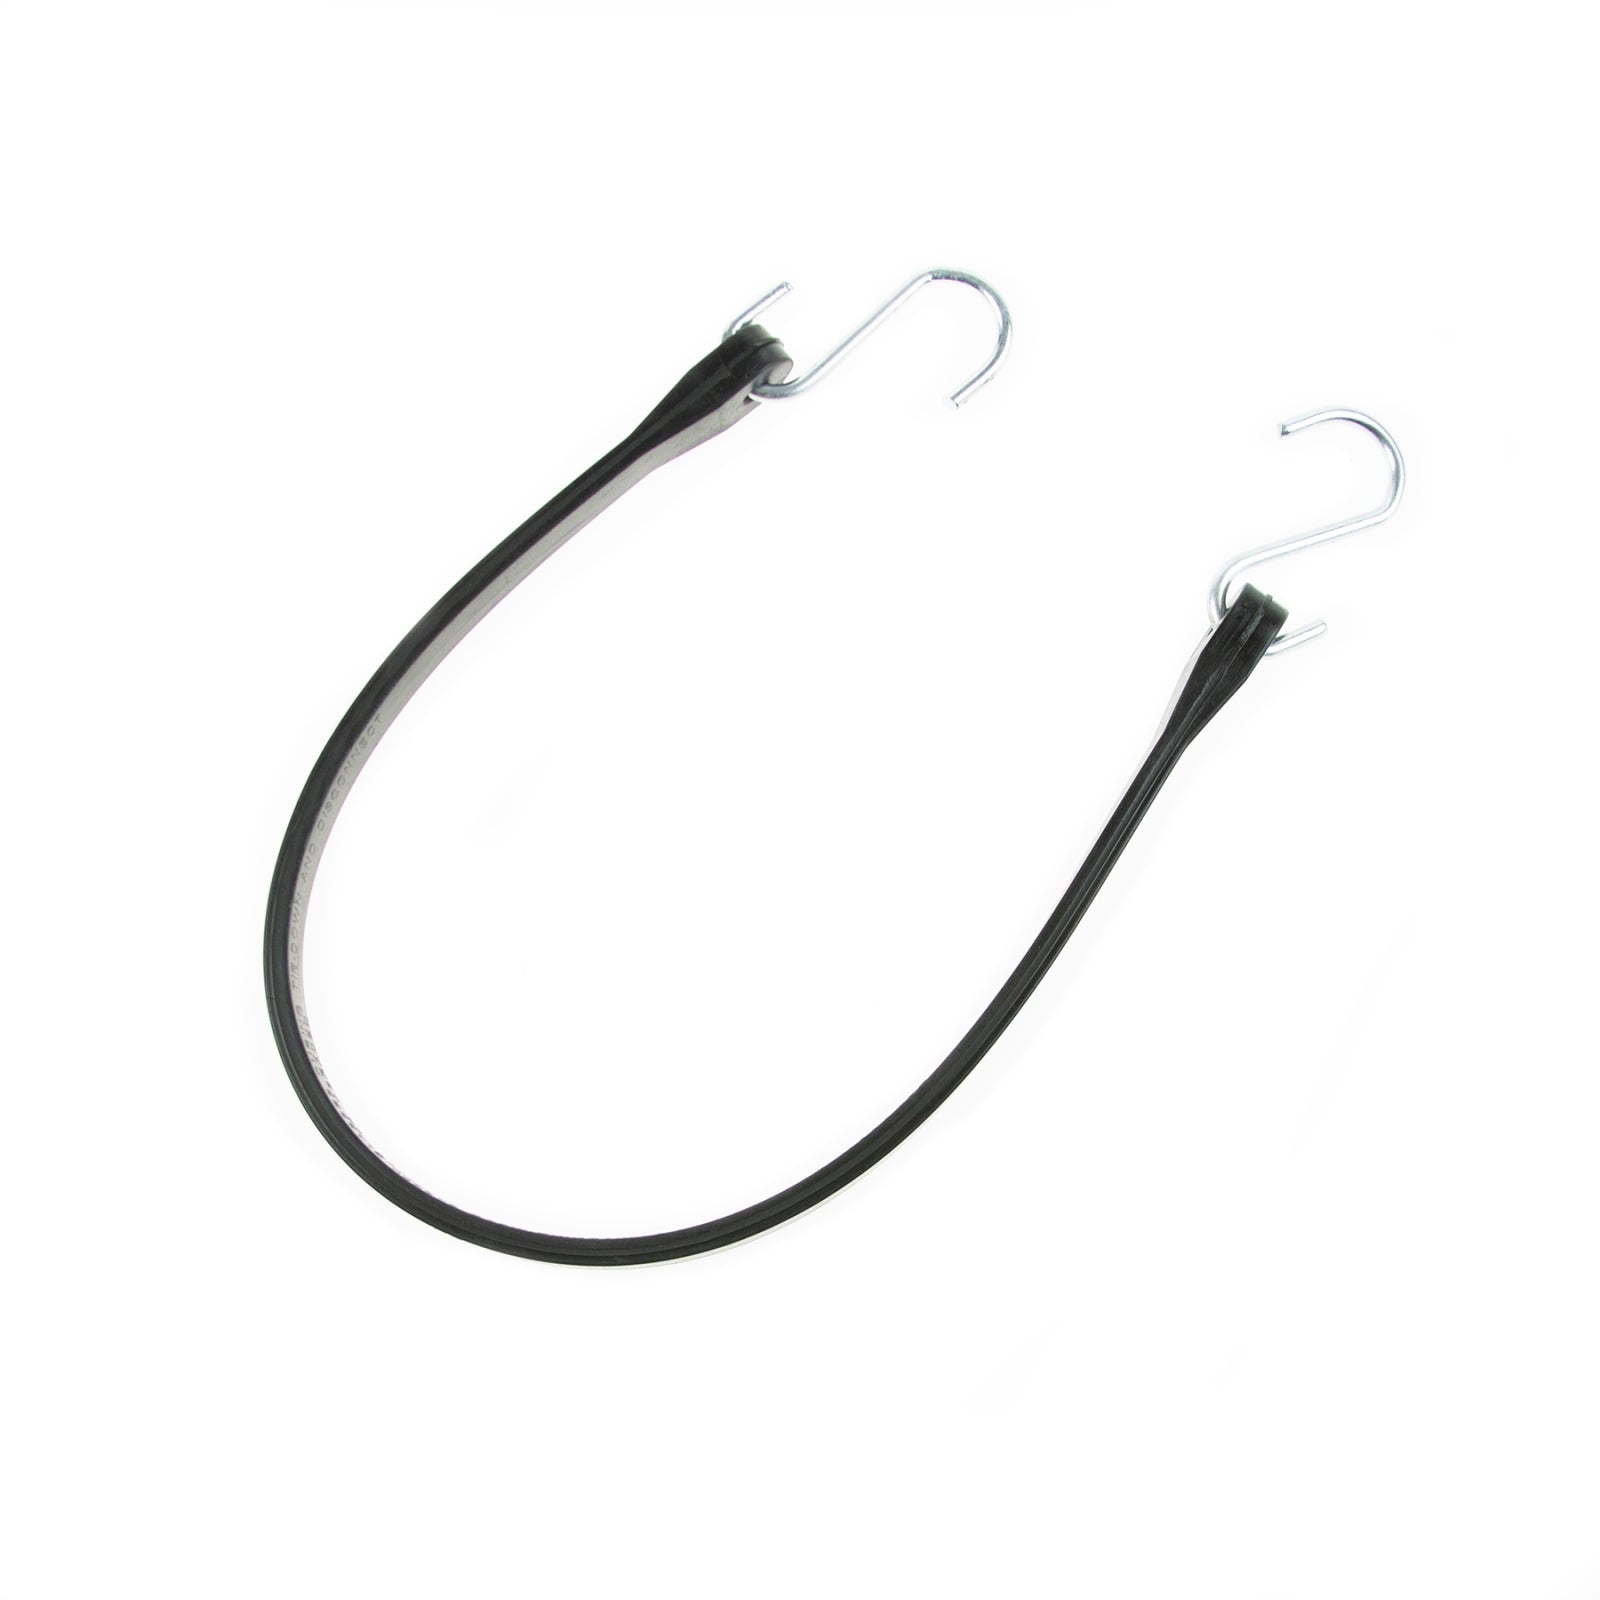 21 INCH RUBBER TIE DOWN - 10 PACK